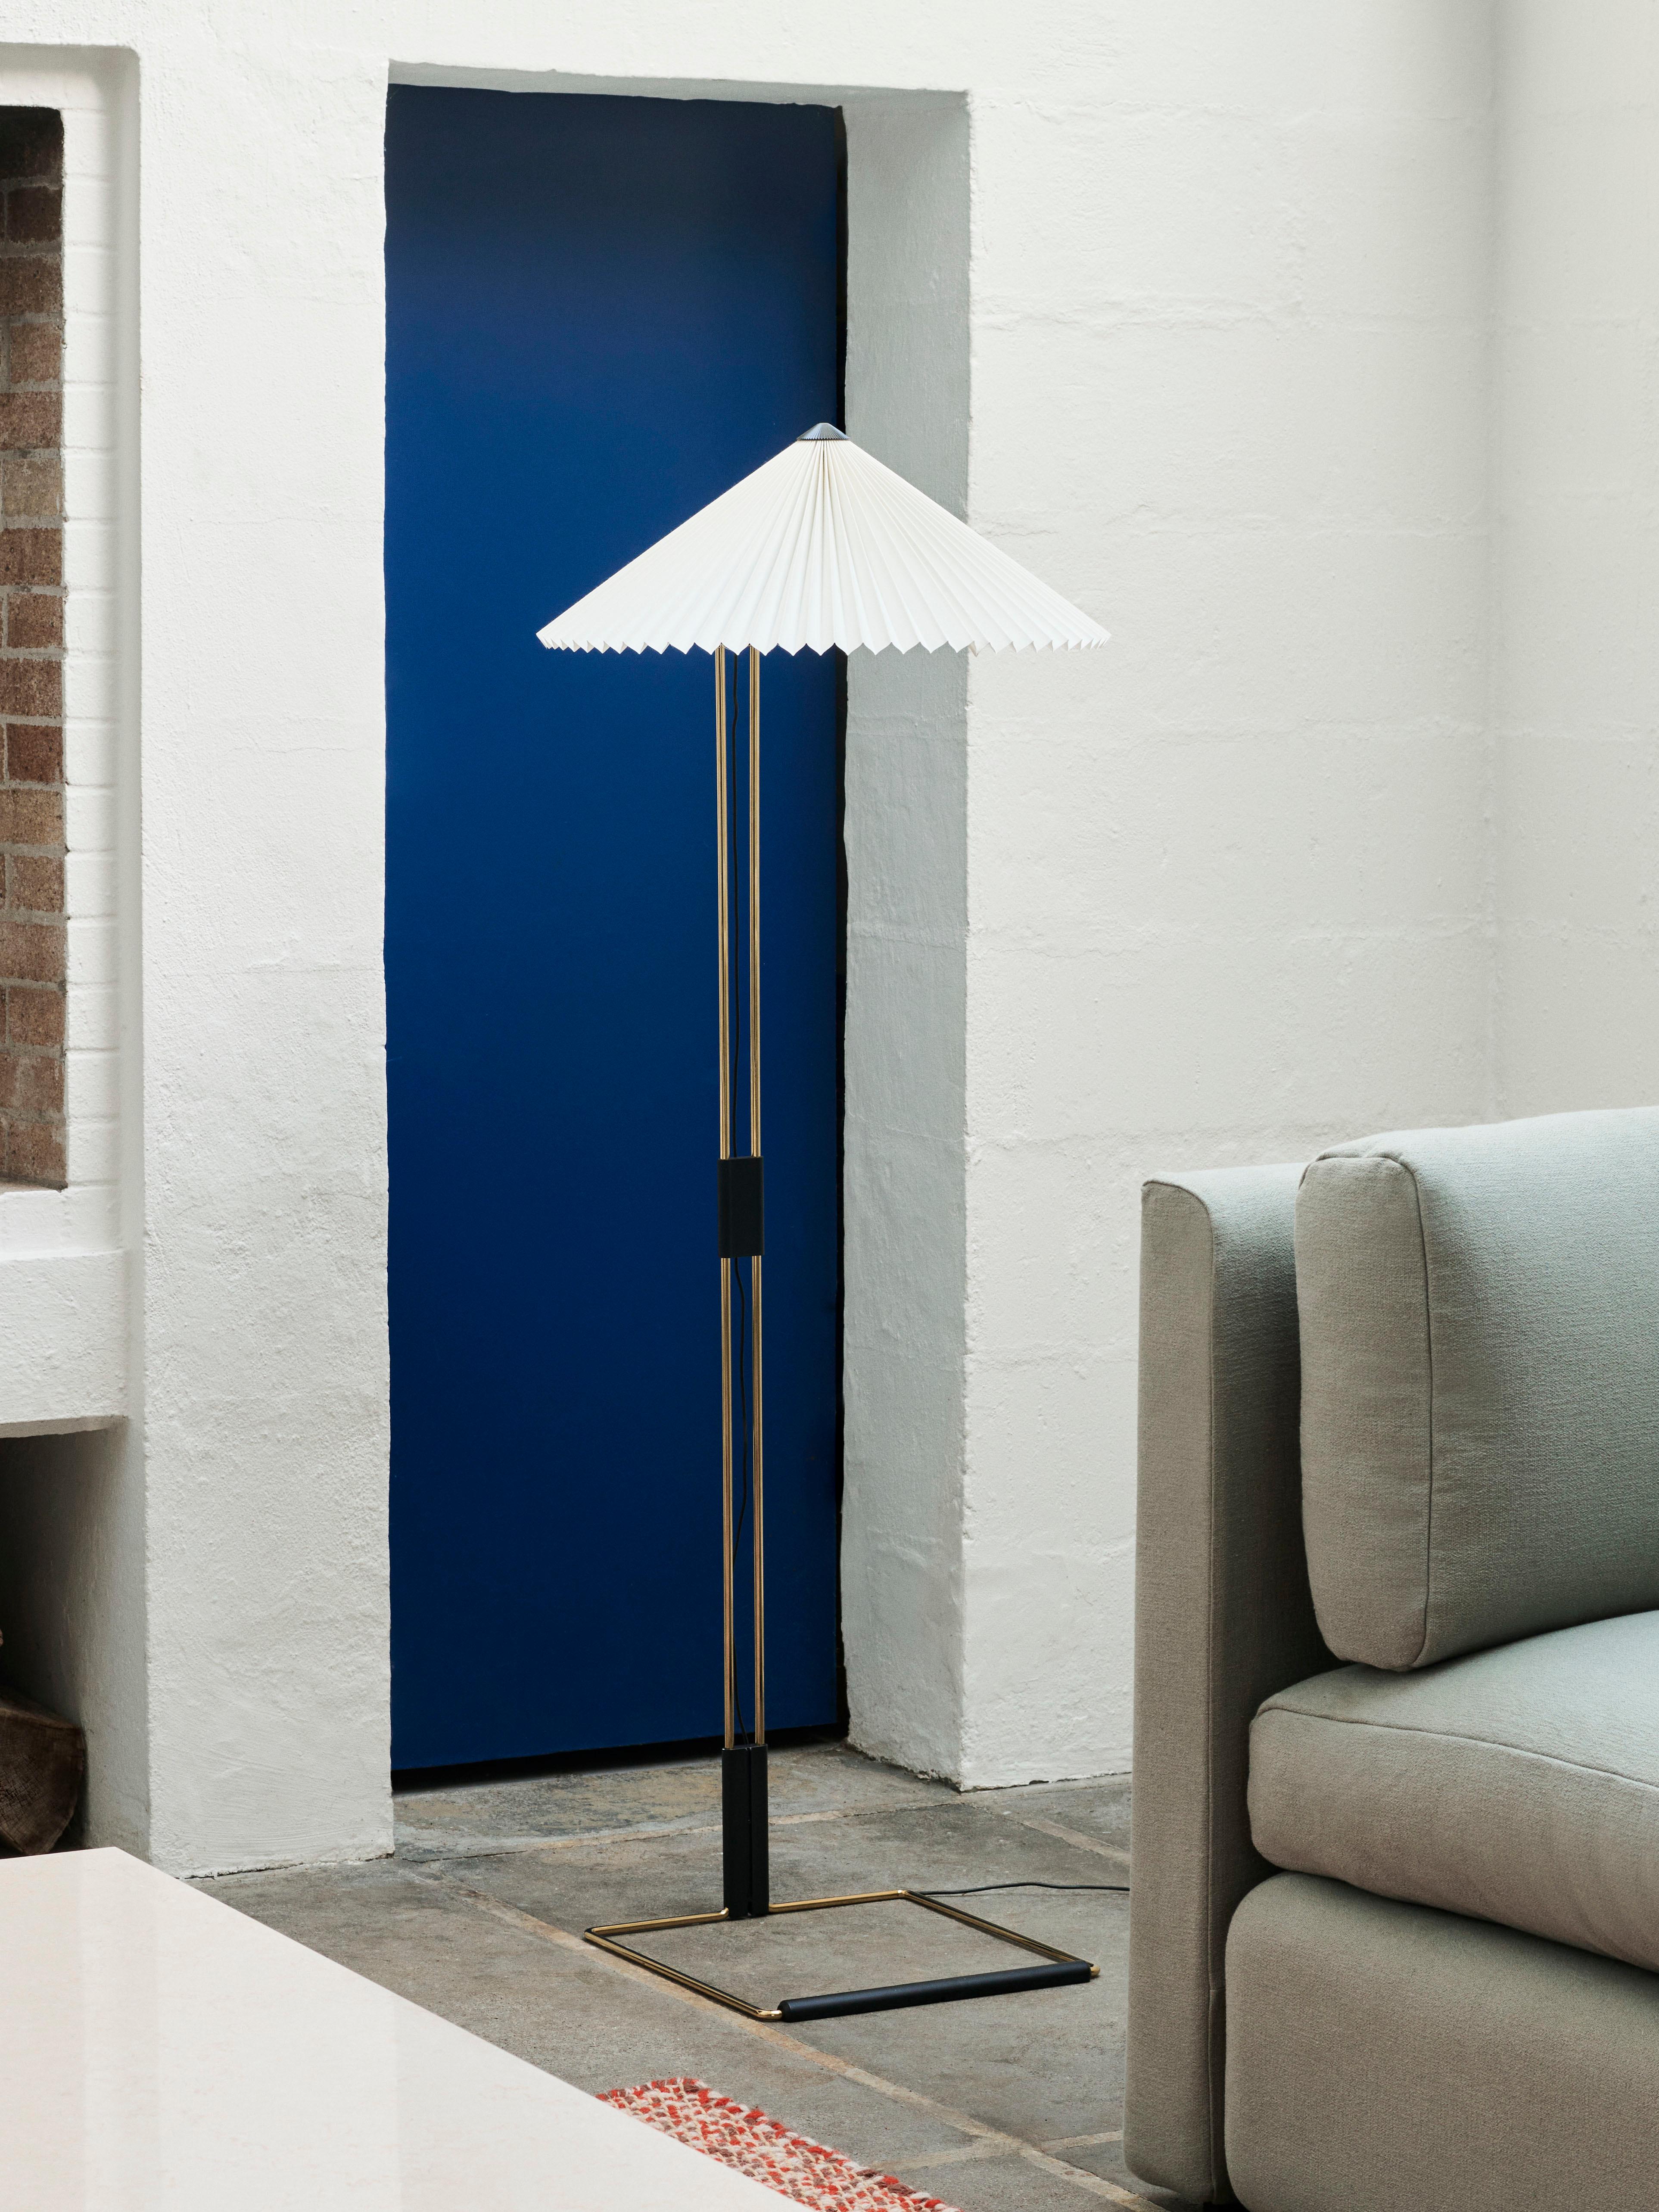 The Matin Floor Lamp offers a contemporary yet poetic design, with a construction that combines visual delicacy with physical robustness. 

The flat-packed design consists of a slender polished brass steel frame complemented with matte black